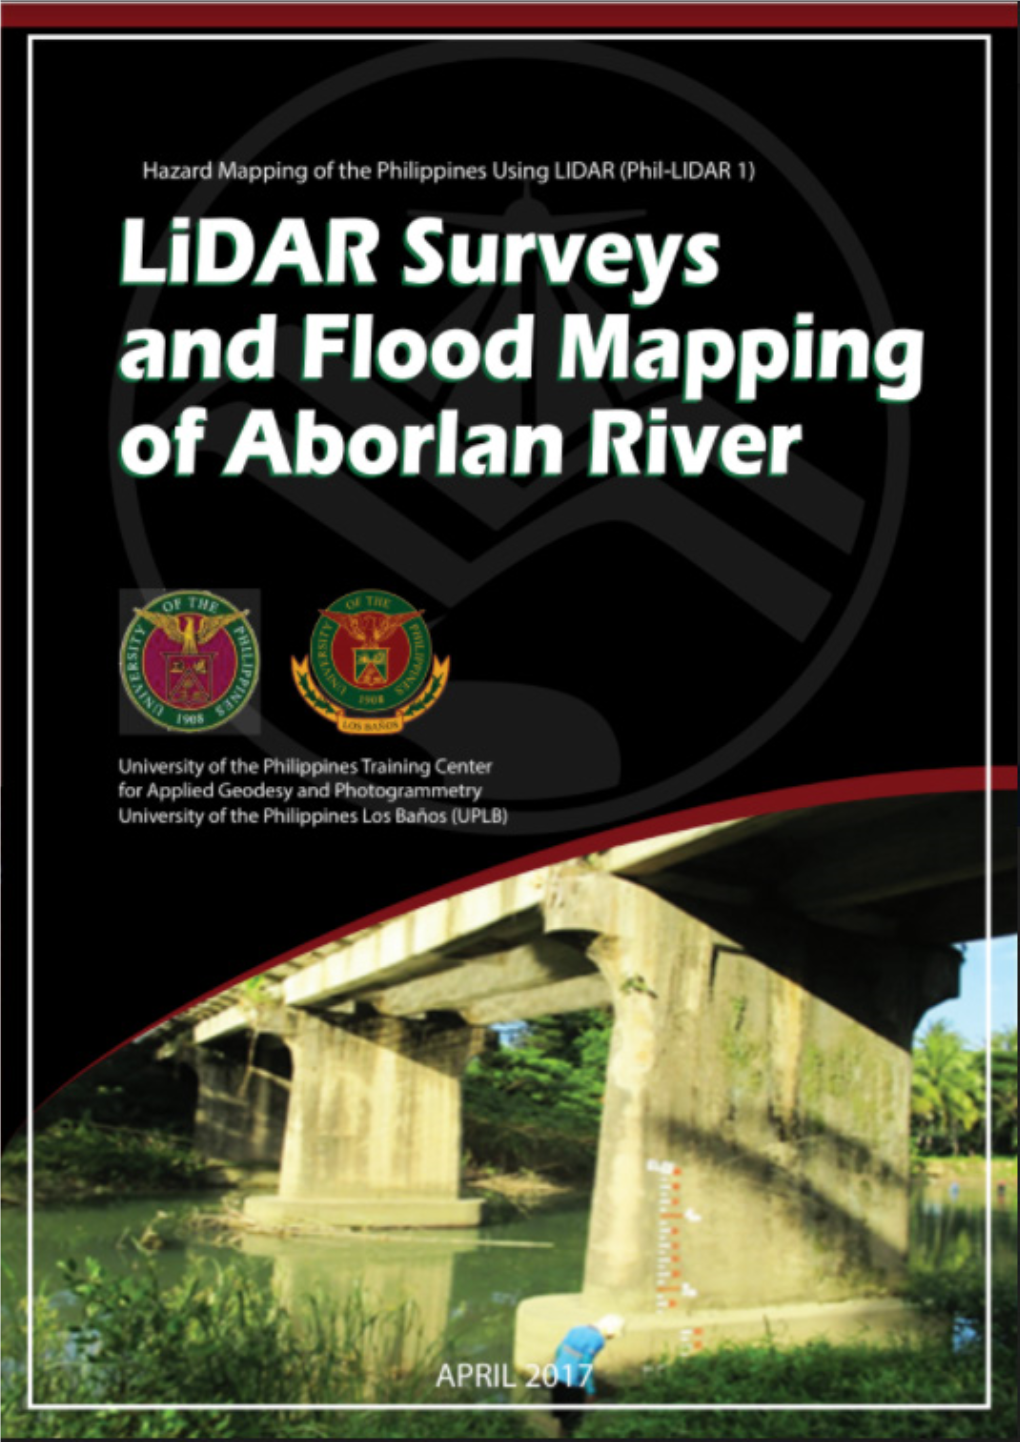 Lidar Surveys and Flood Mapping of Aborlan River